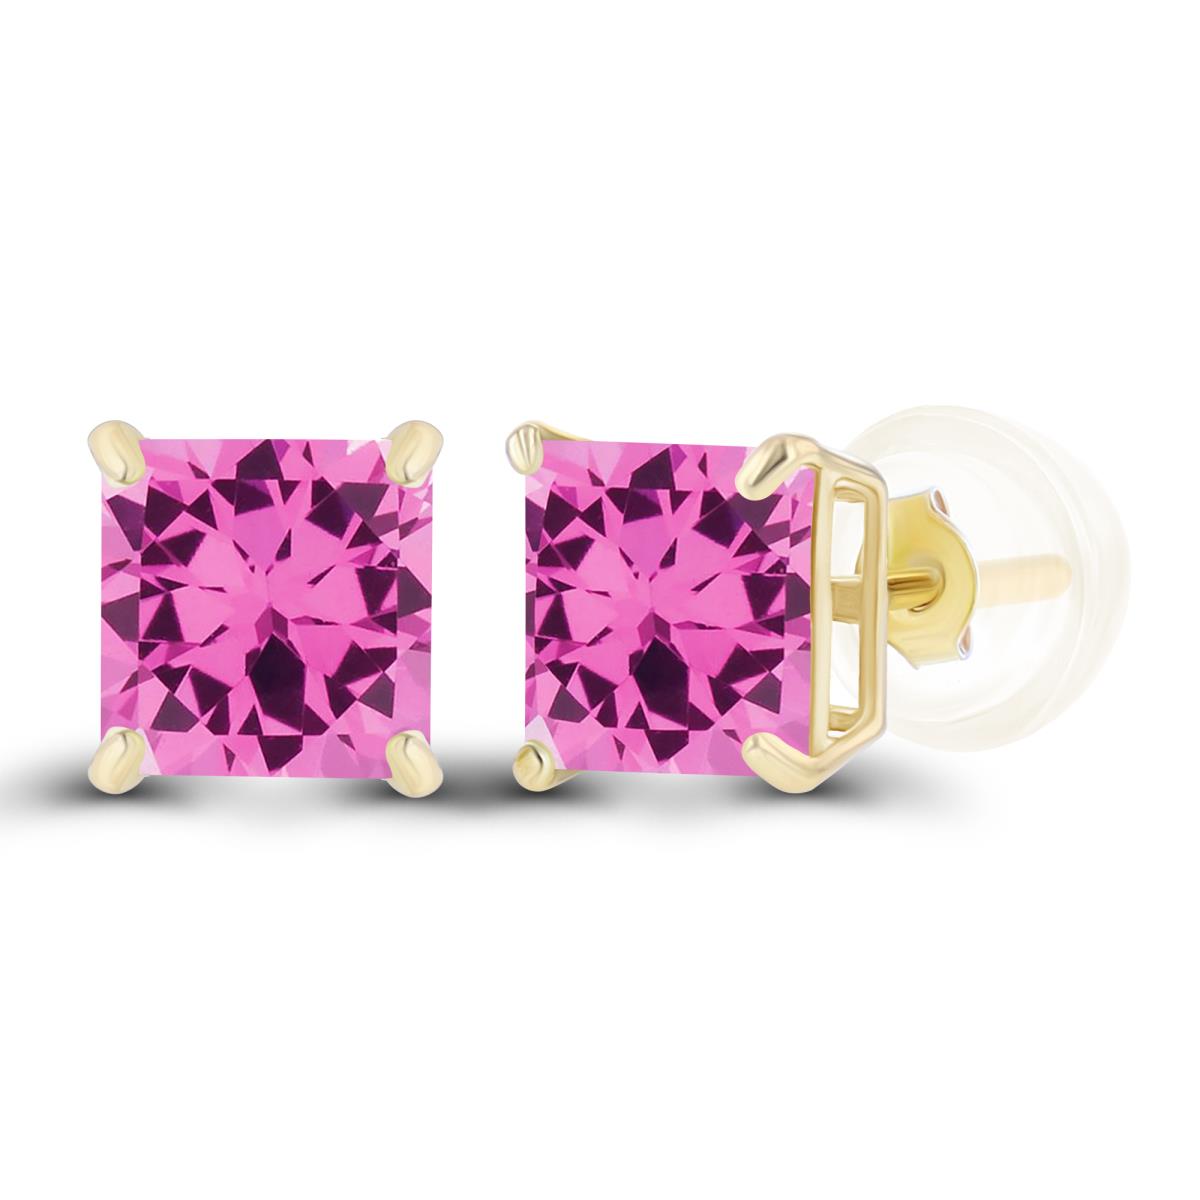 14K Yellow Gold 5mm Square Created Pink Sapphire Basket Stud Earrings